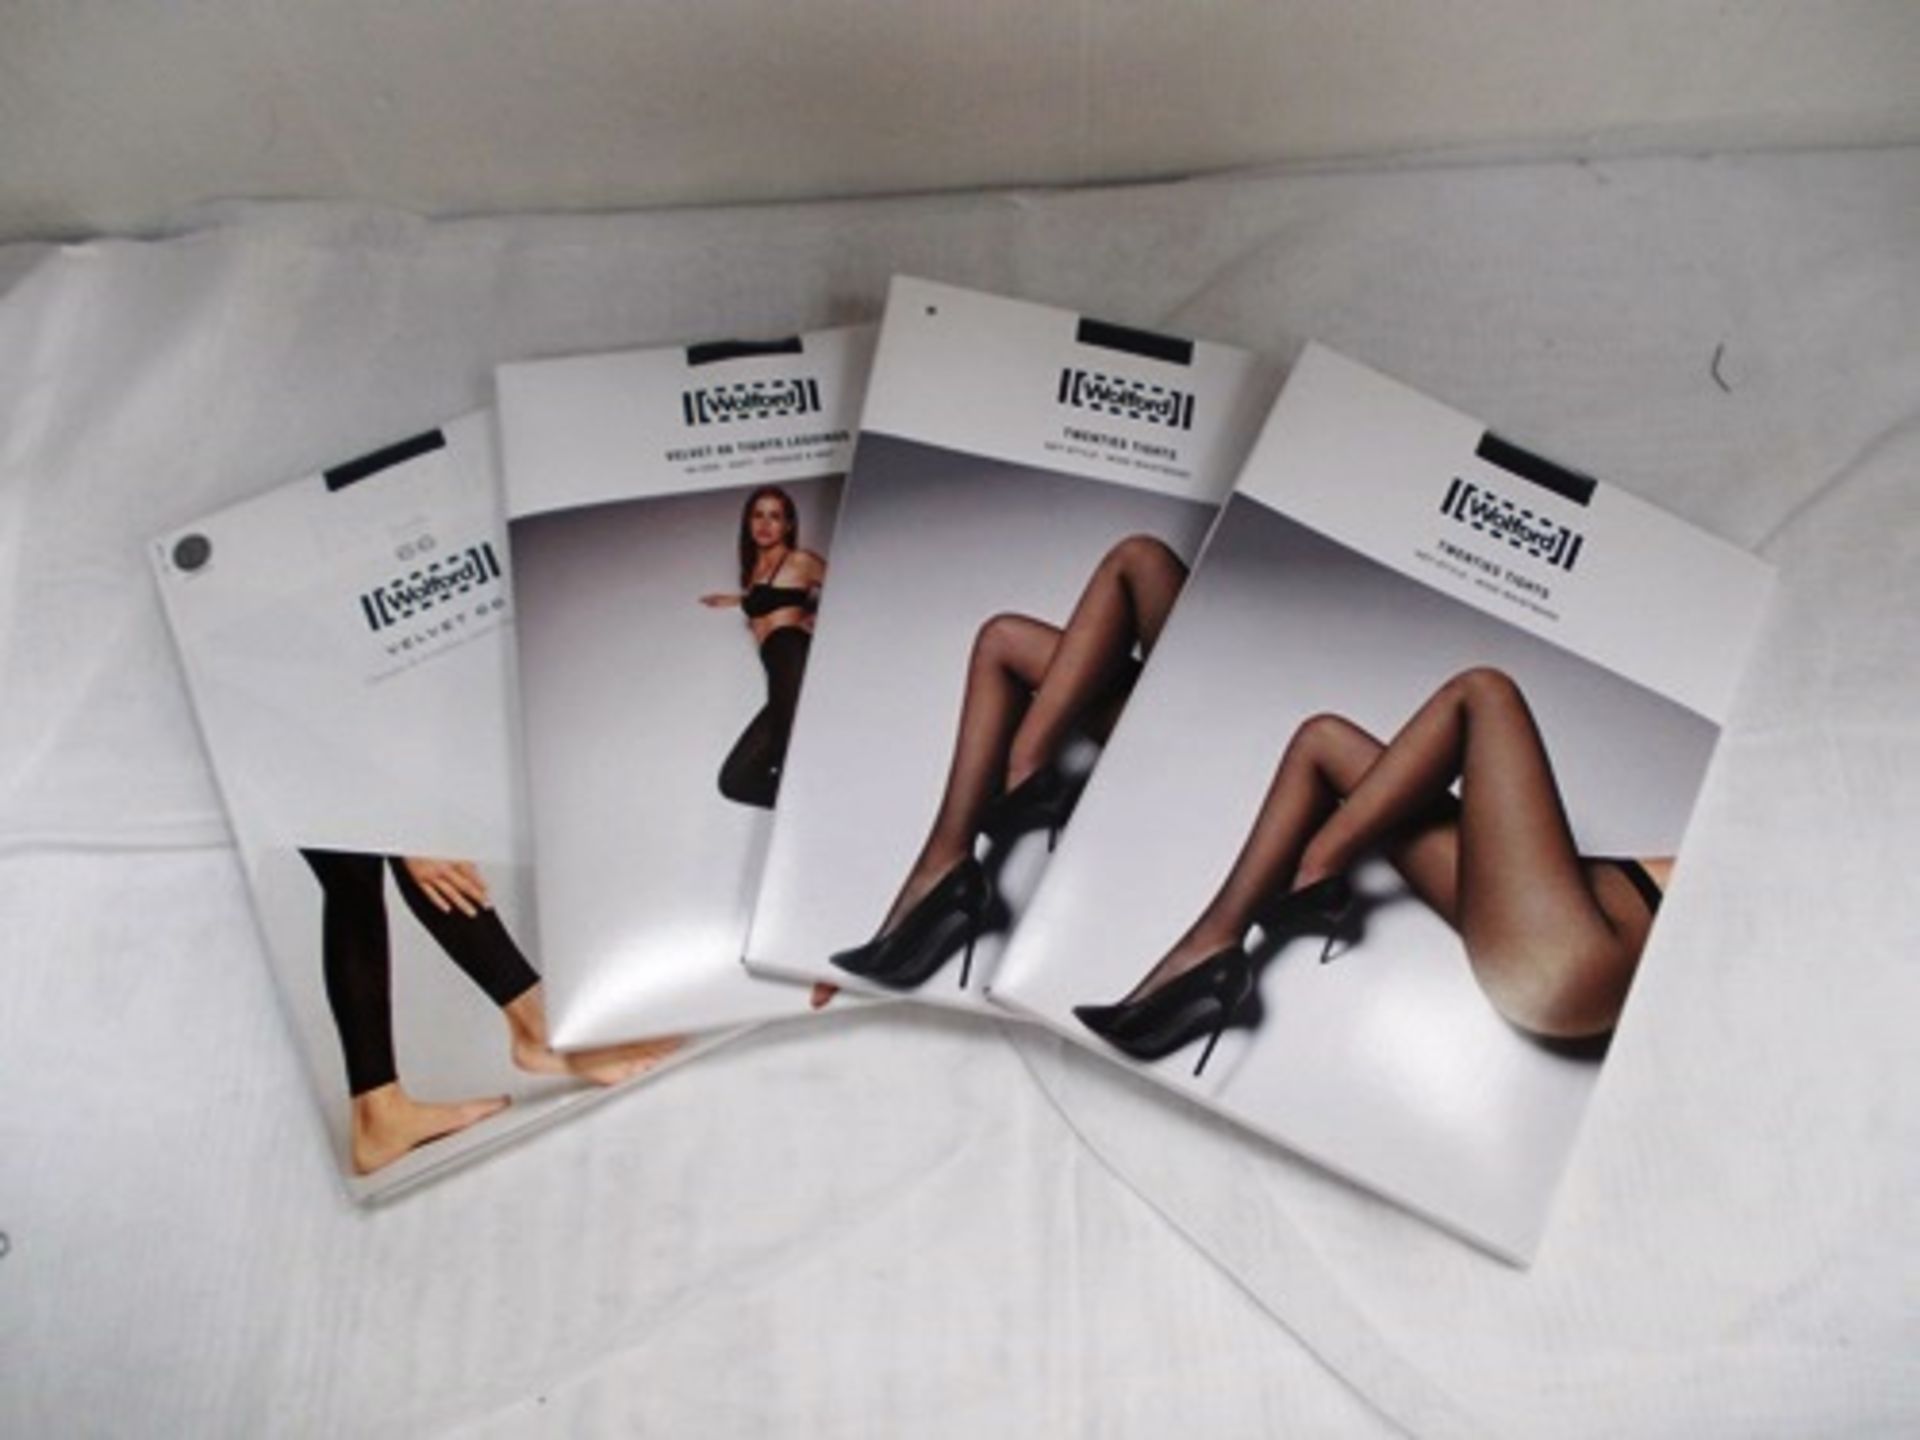 8 x pairs of Woldford tights and leggings including Twenties tights and Velvet 66 leggings and